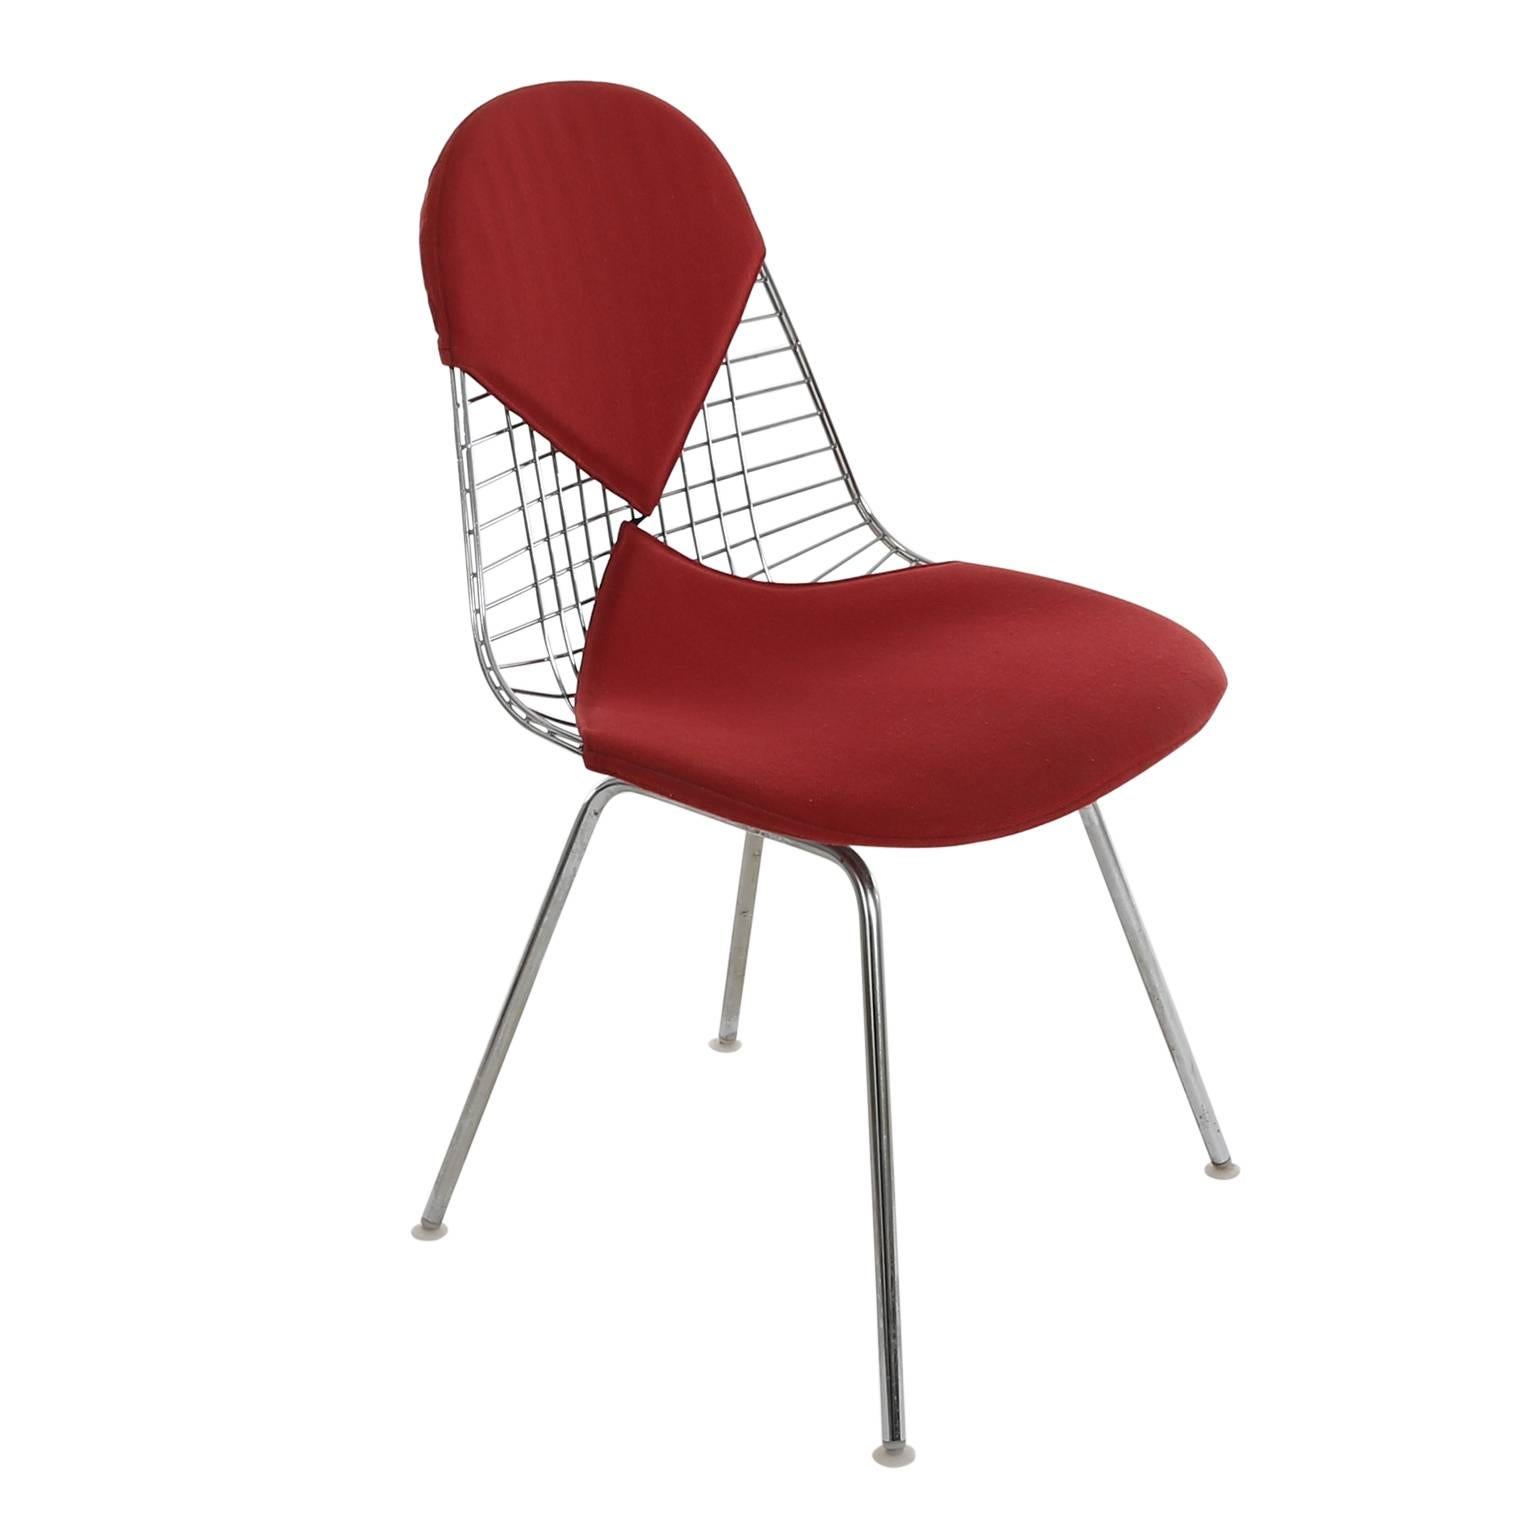 European Wire Chair DKX 5 by Ray & Charles Eames with Red Bikini Cover Designed in 1951 For Sale